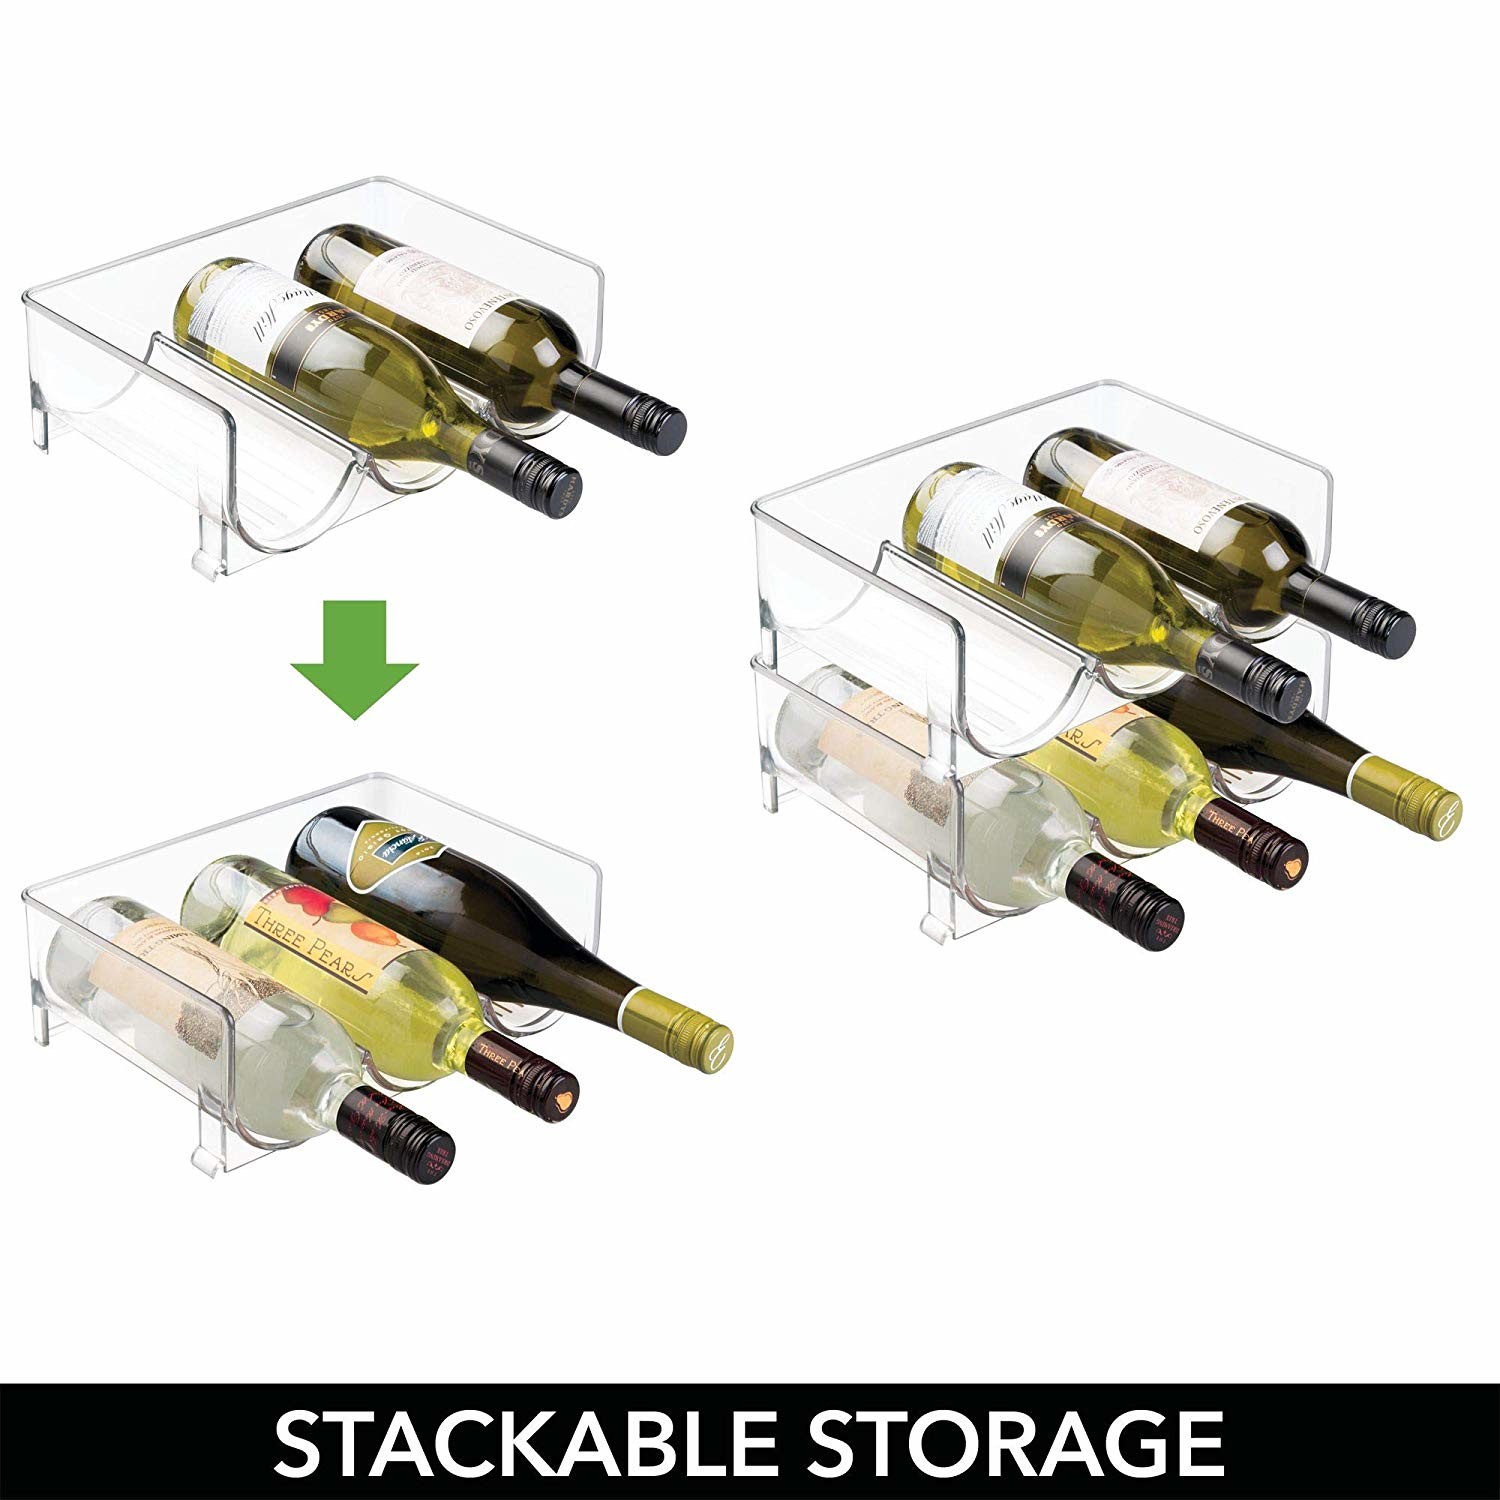 Buy cheap Contemporary Stackable Acrylic Wine Bottle Holder For Kitchen Countertops product